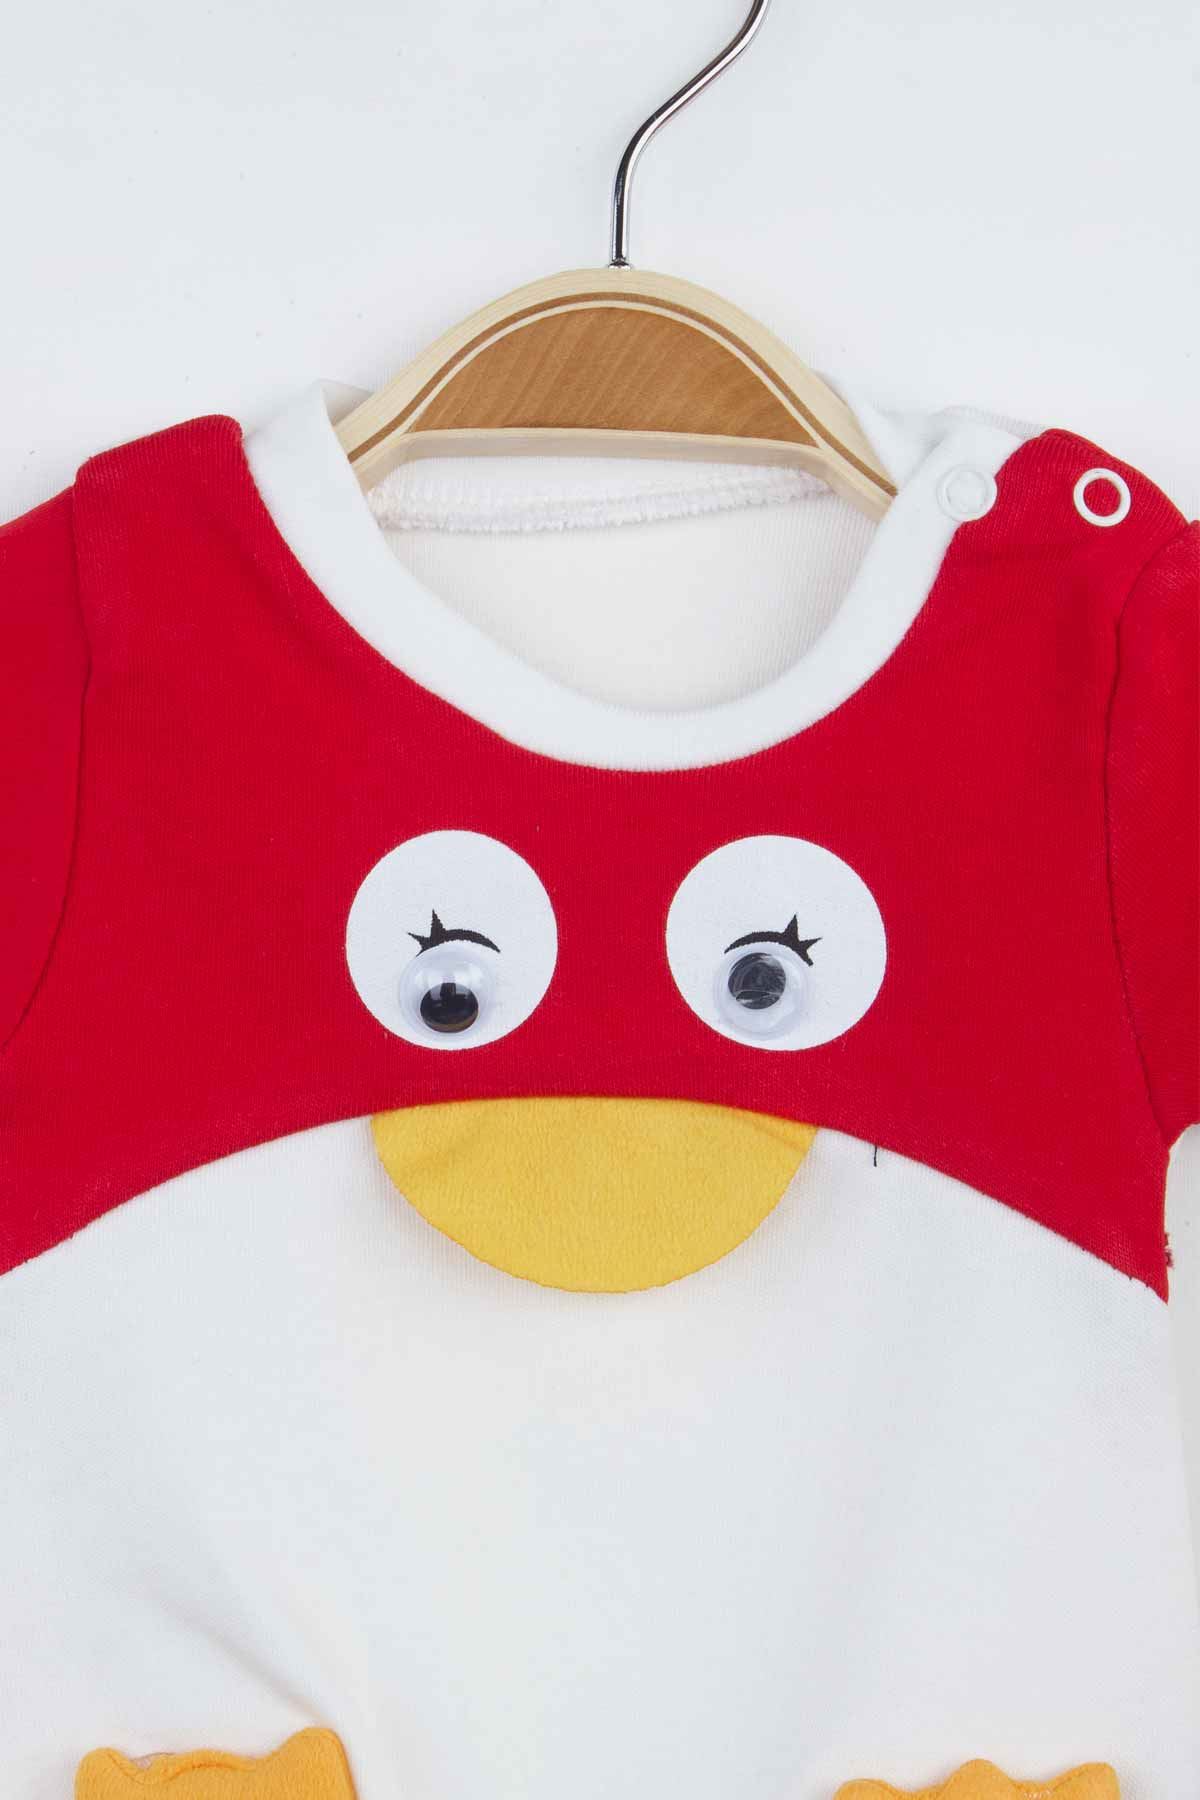 Red Penguin Summer Baby Boy Rompers Fashion 2021 New Season Style Babies Clothes Outfit Cotton Comfortable Underwear for Boys Baby